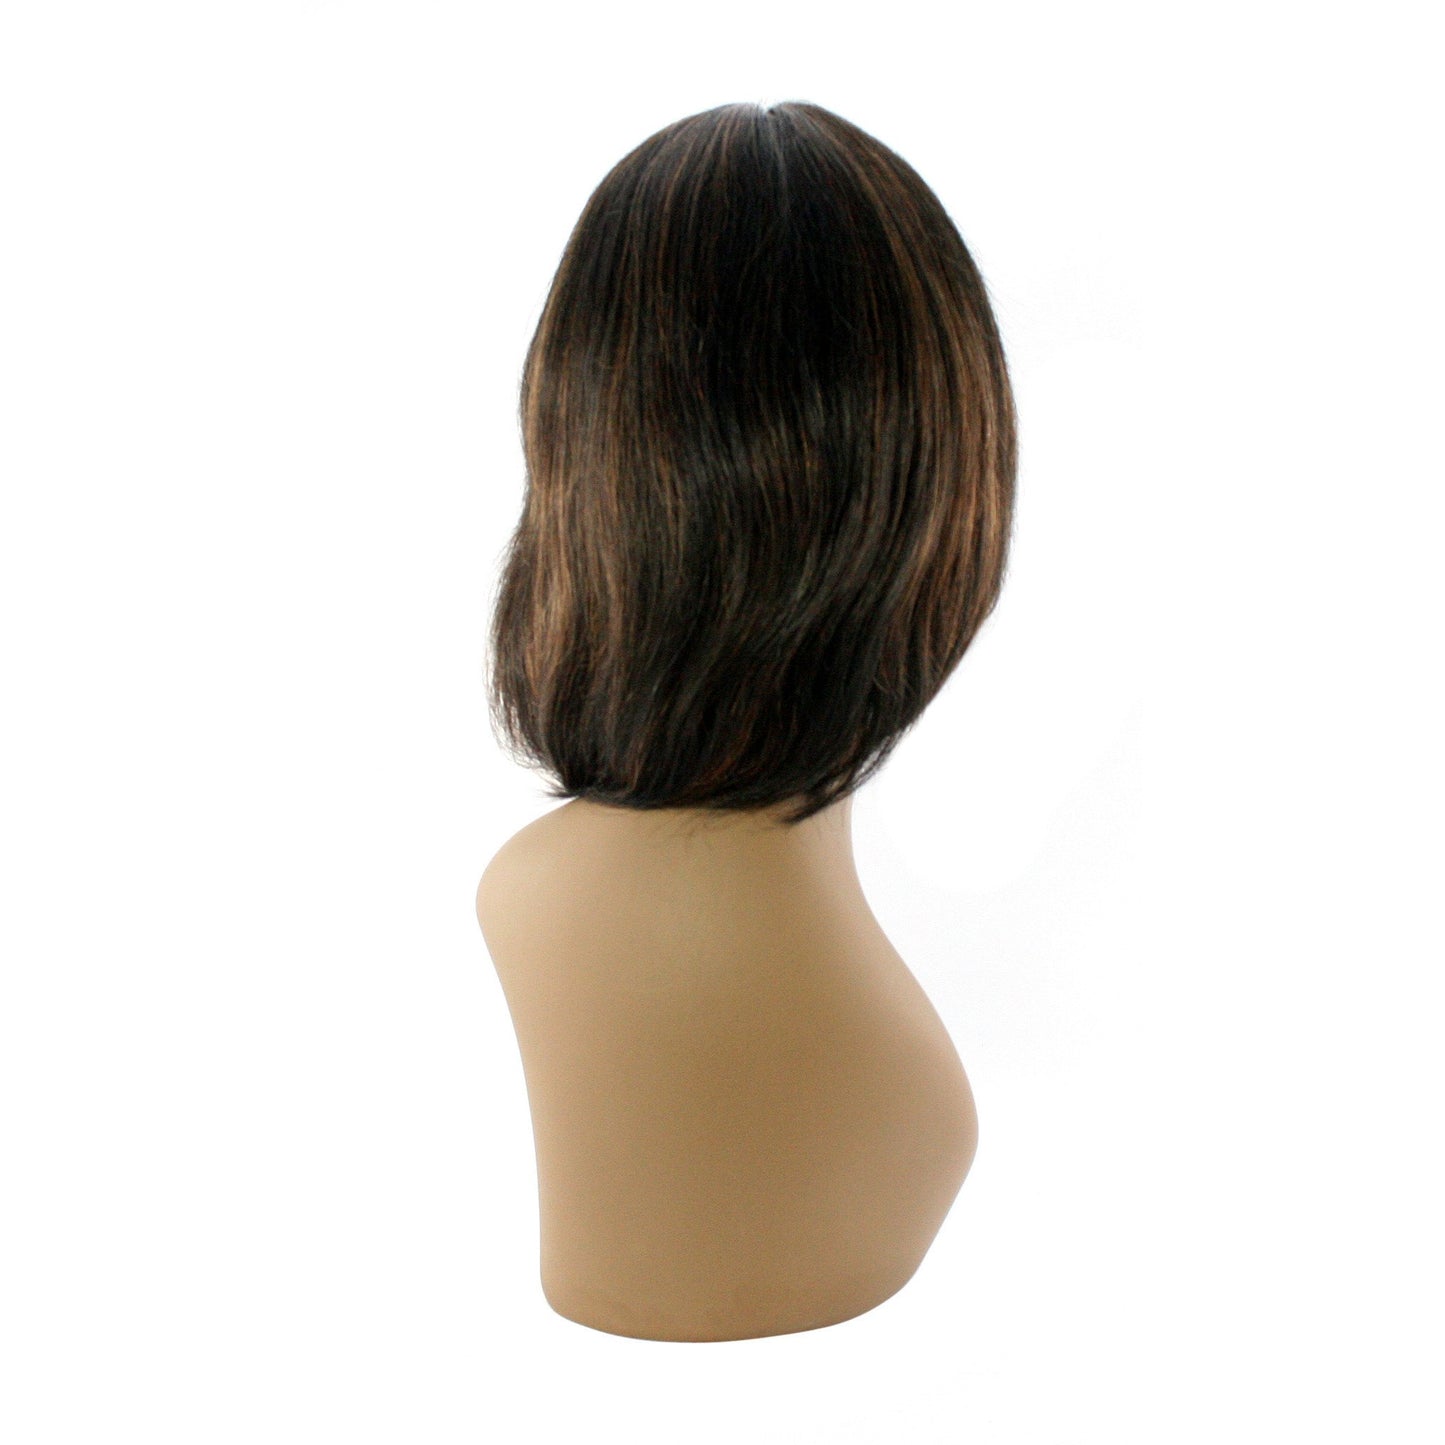 Unique's 100% Human Hair Full Wig / Style "T" - BeautyGiant USA